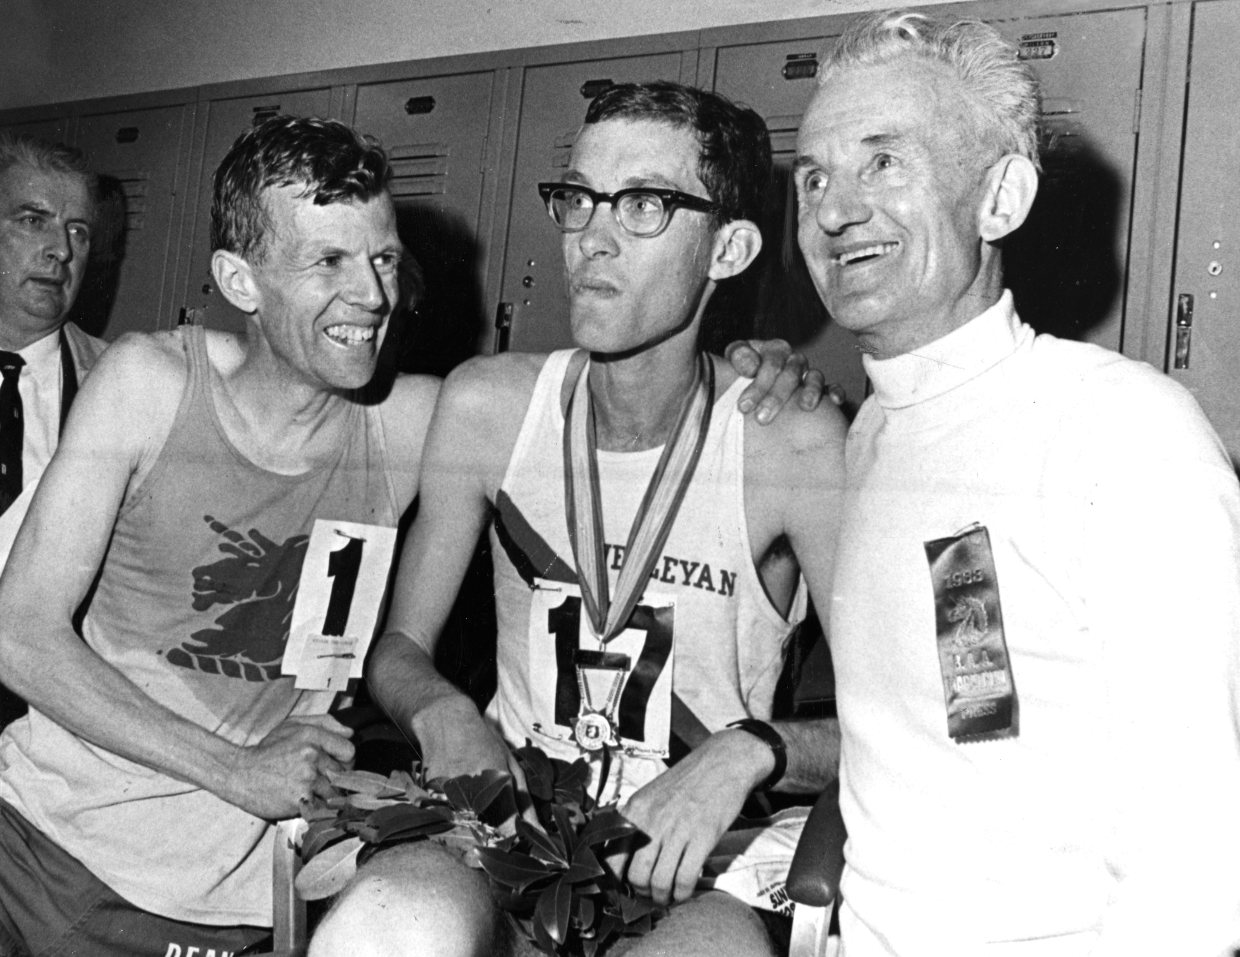 Amby Burfoot, who coined the term Yasso 800s, and two other runners after the 1968 Boston Marathon